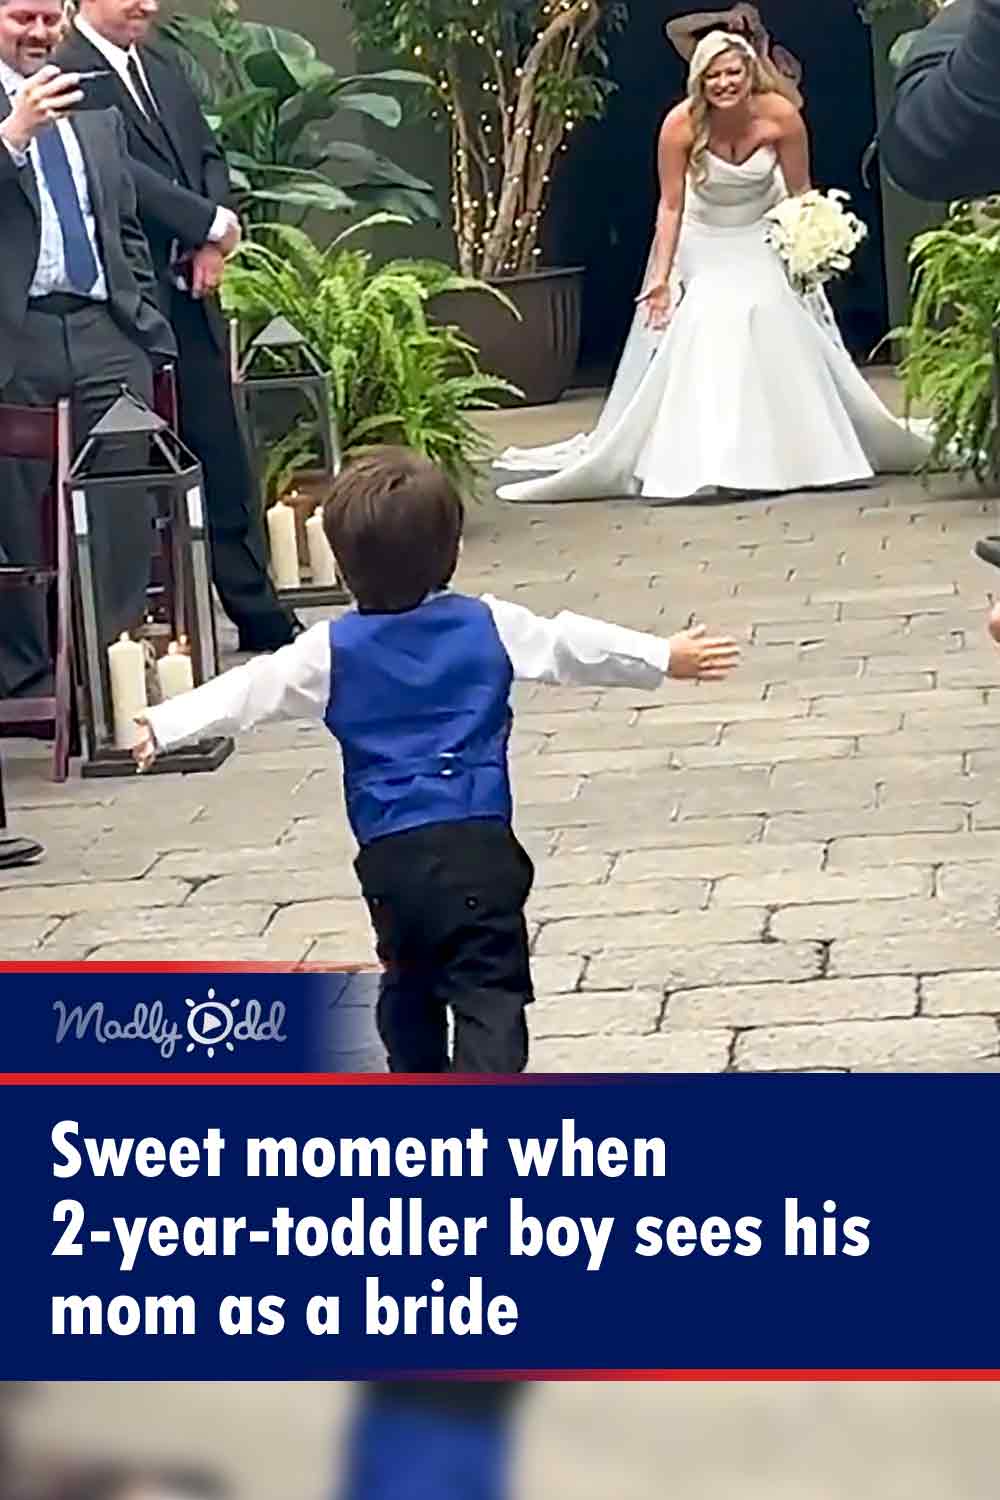 Sweet moment when 2-year-toddler boy sees his mom as a bride